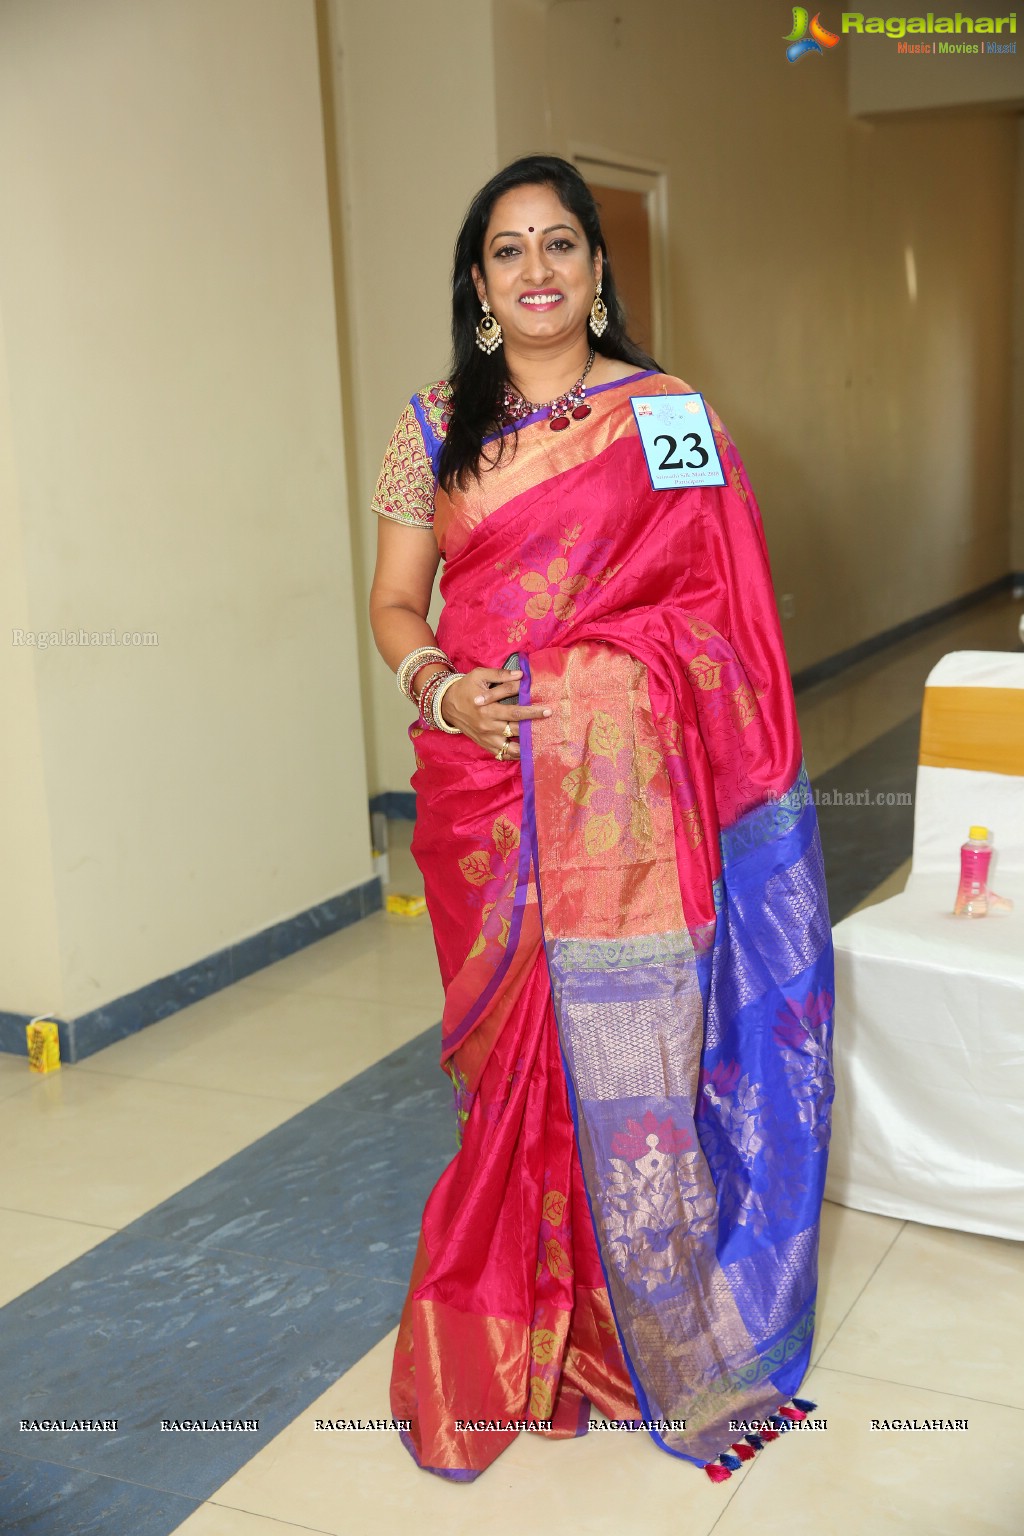 Srimathi Silk Mark Beauty Pageant Auditions 2018 at Central Silk Board, Jubilee Hills